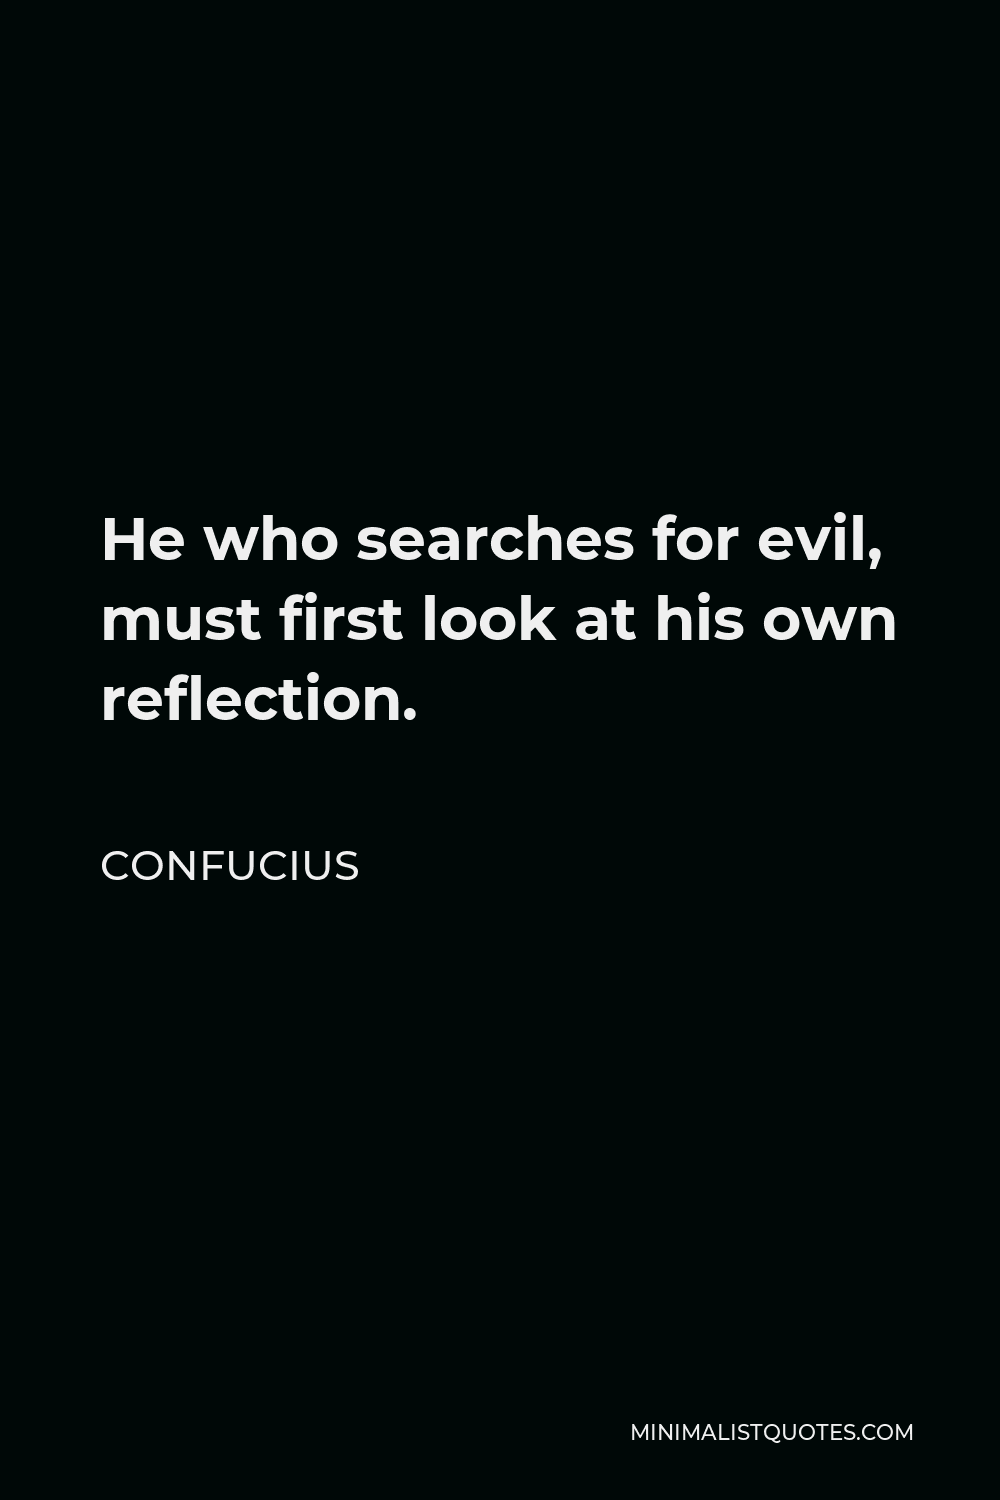 Confucius Quote - He who searches for evil, must first look at his own reflection.